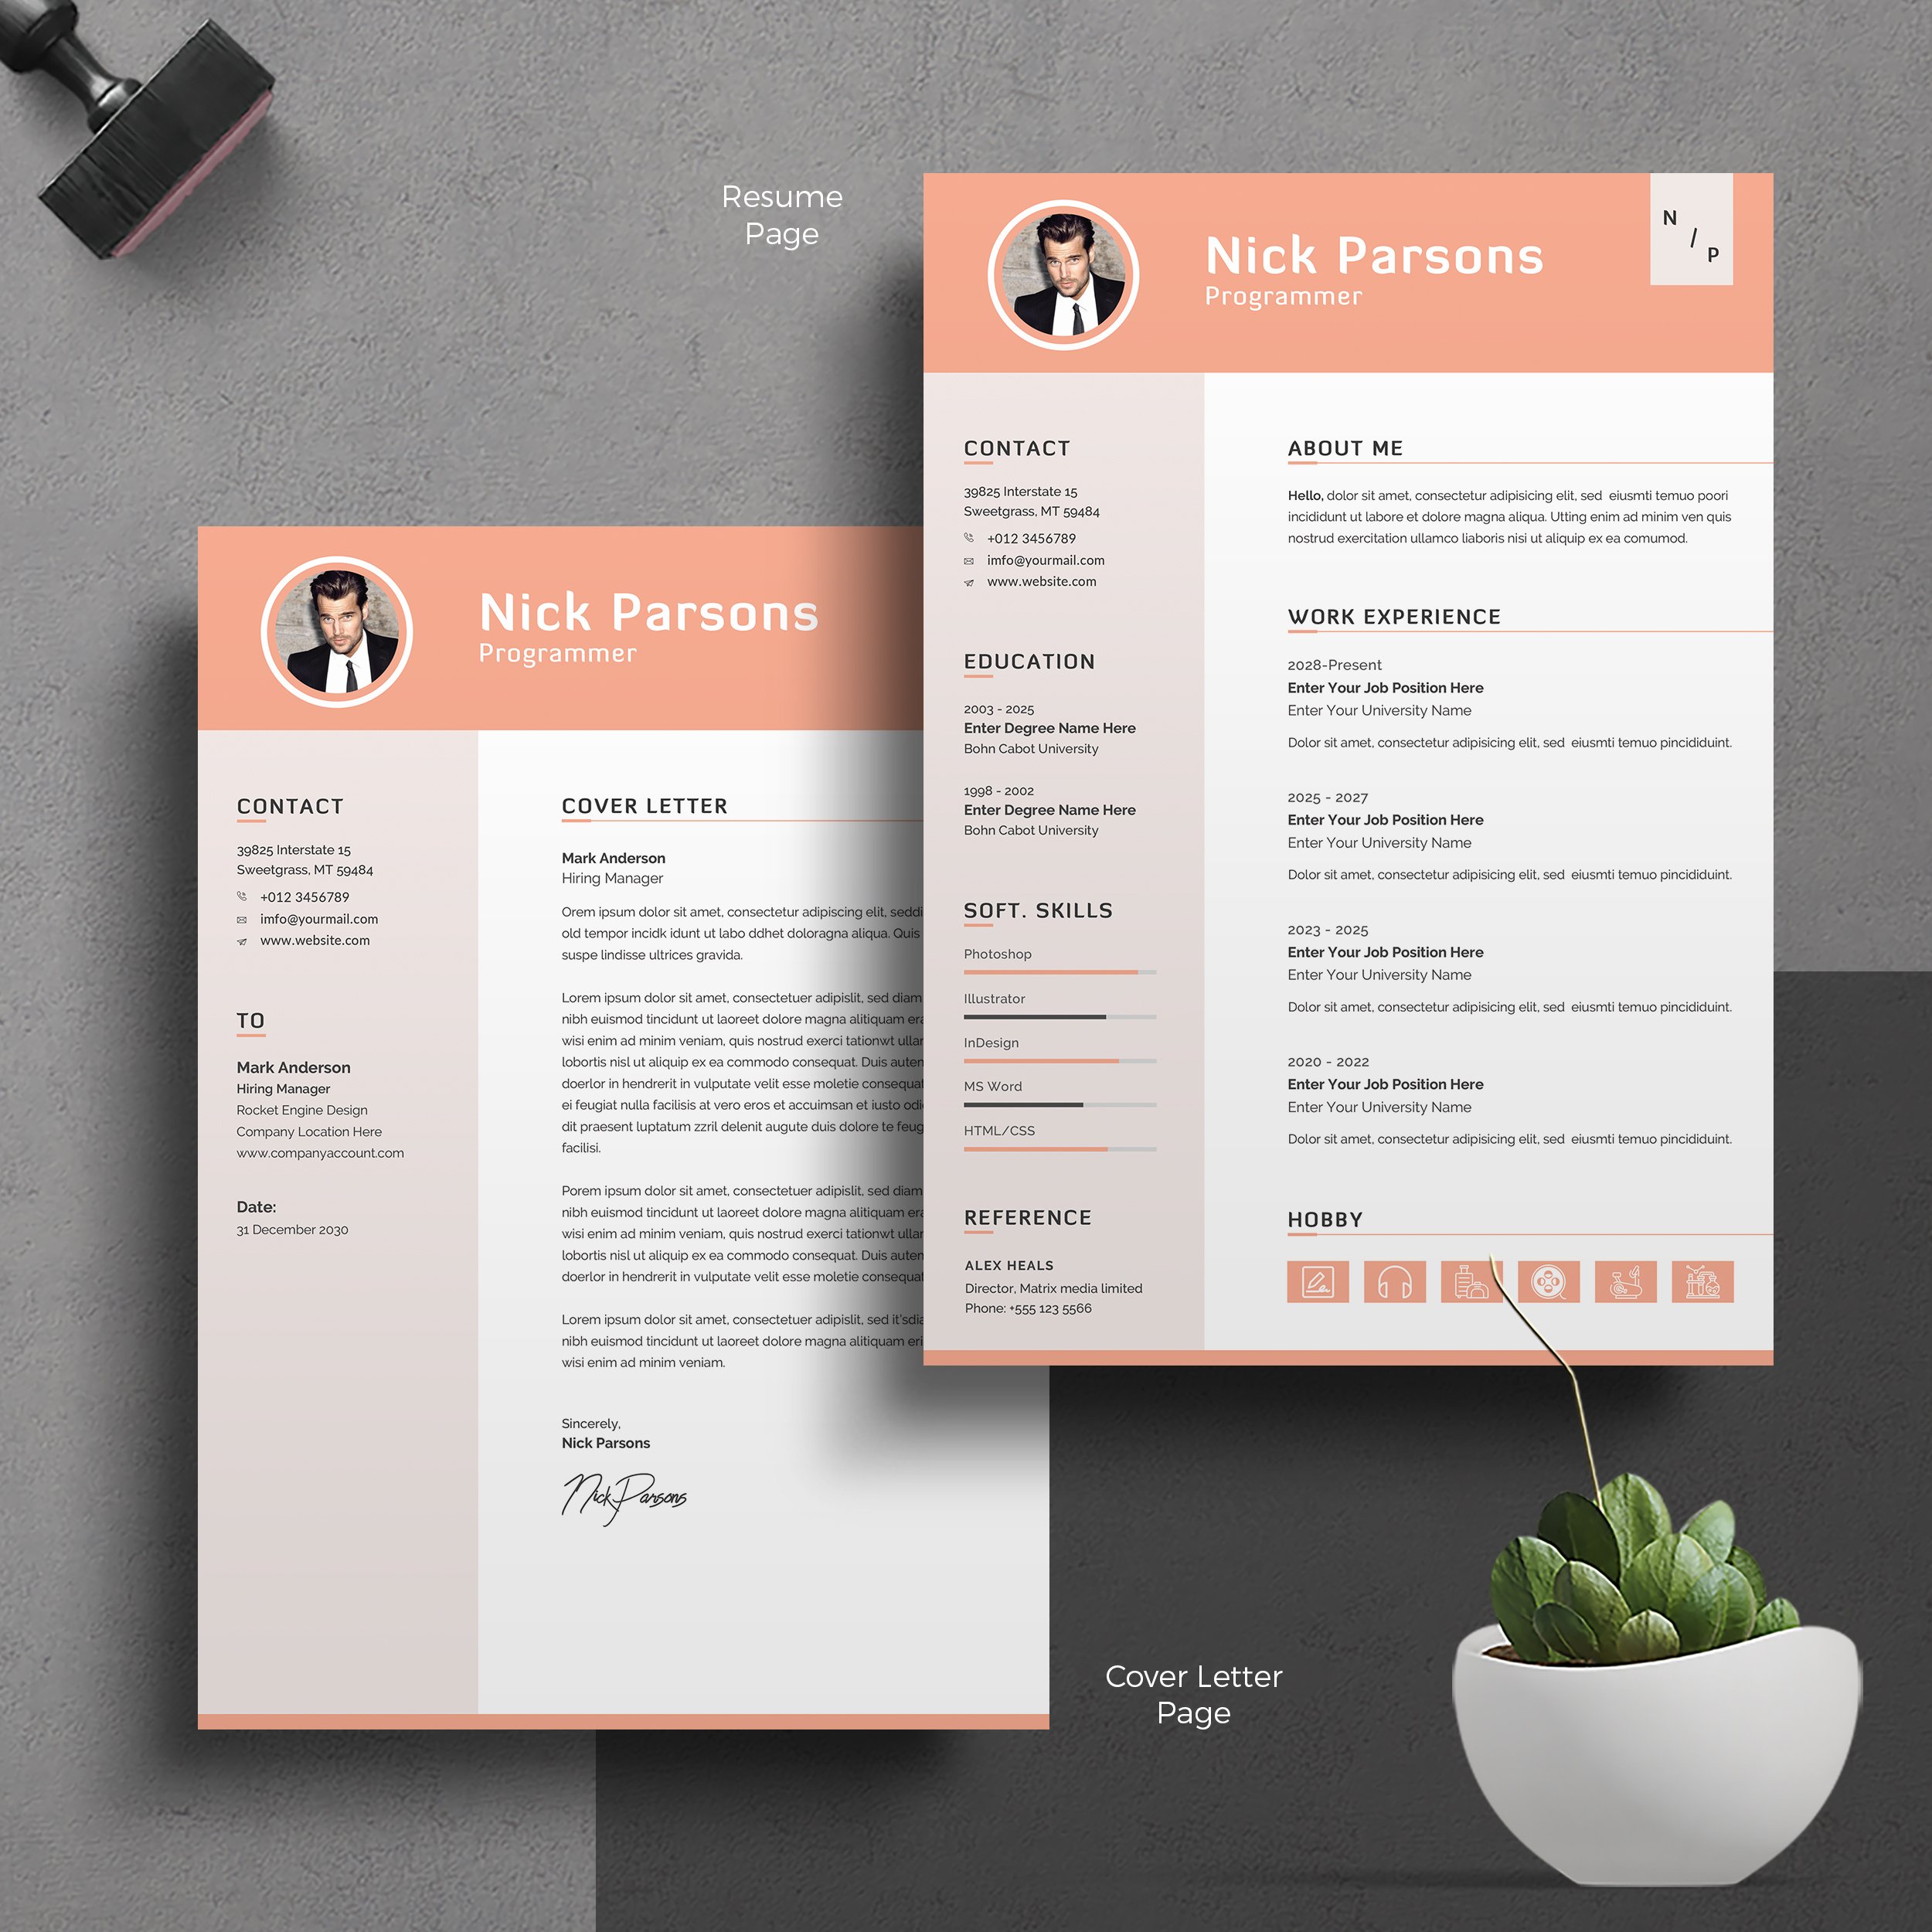 Clean and modern resume and cover letter.